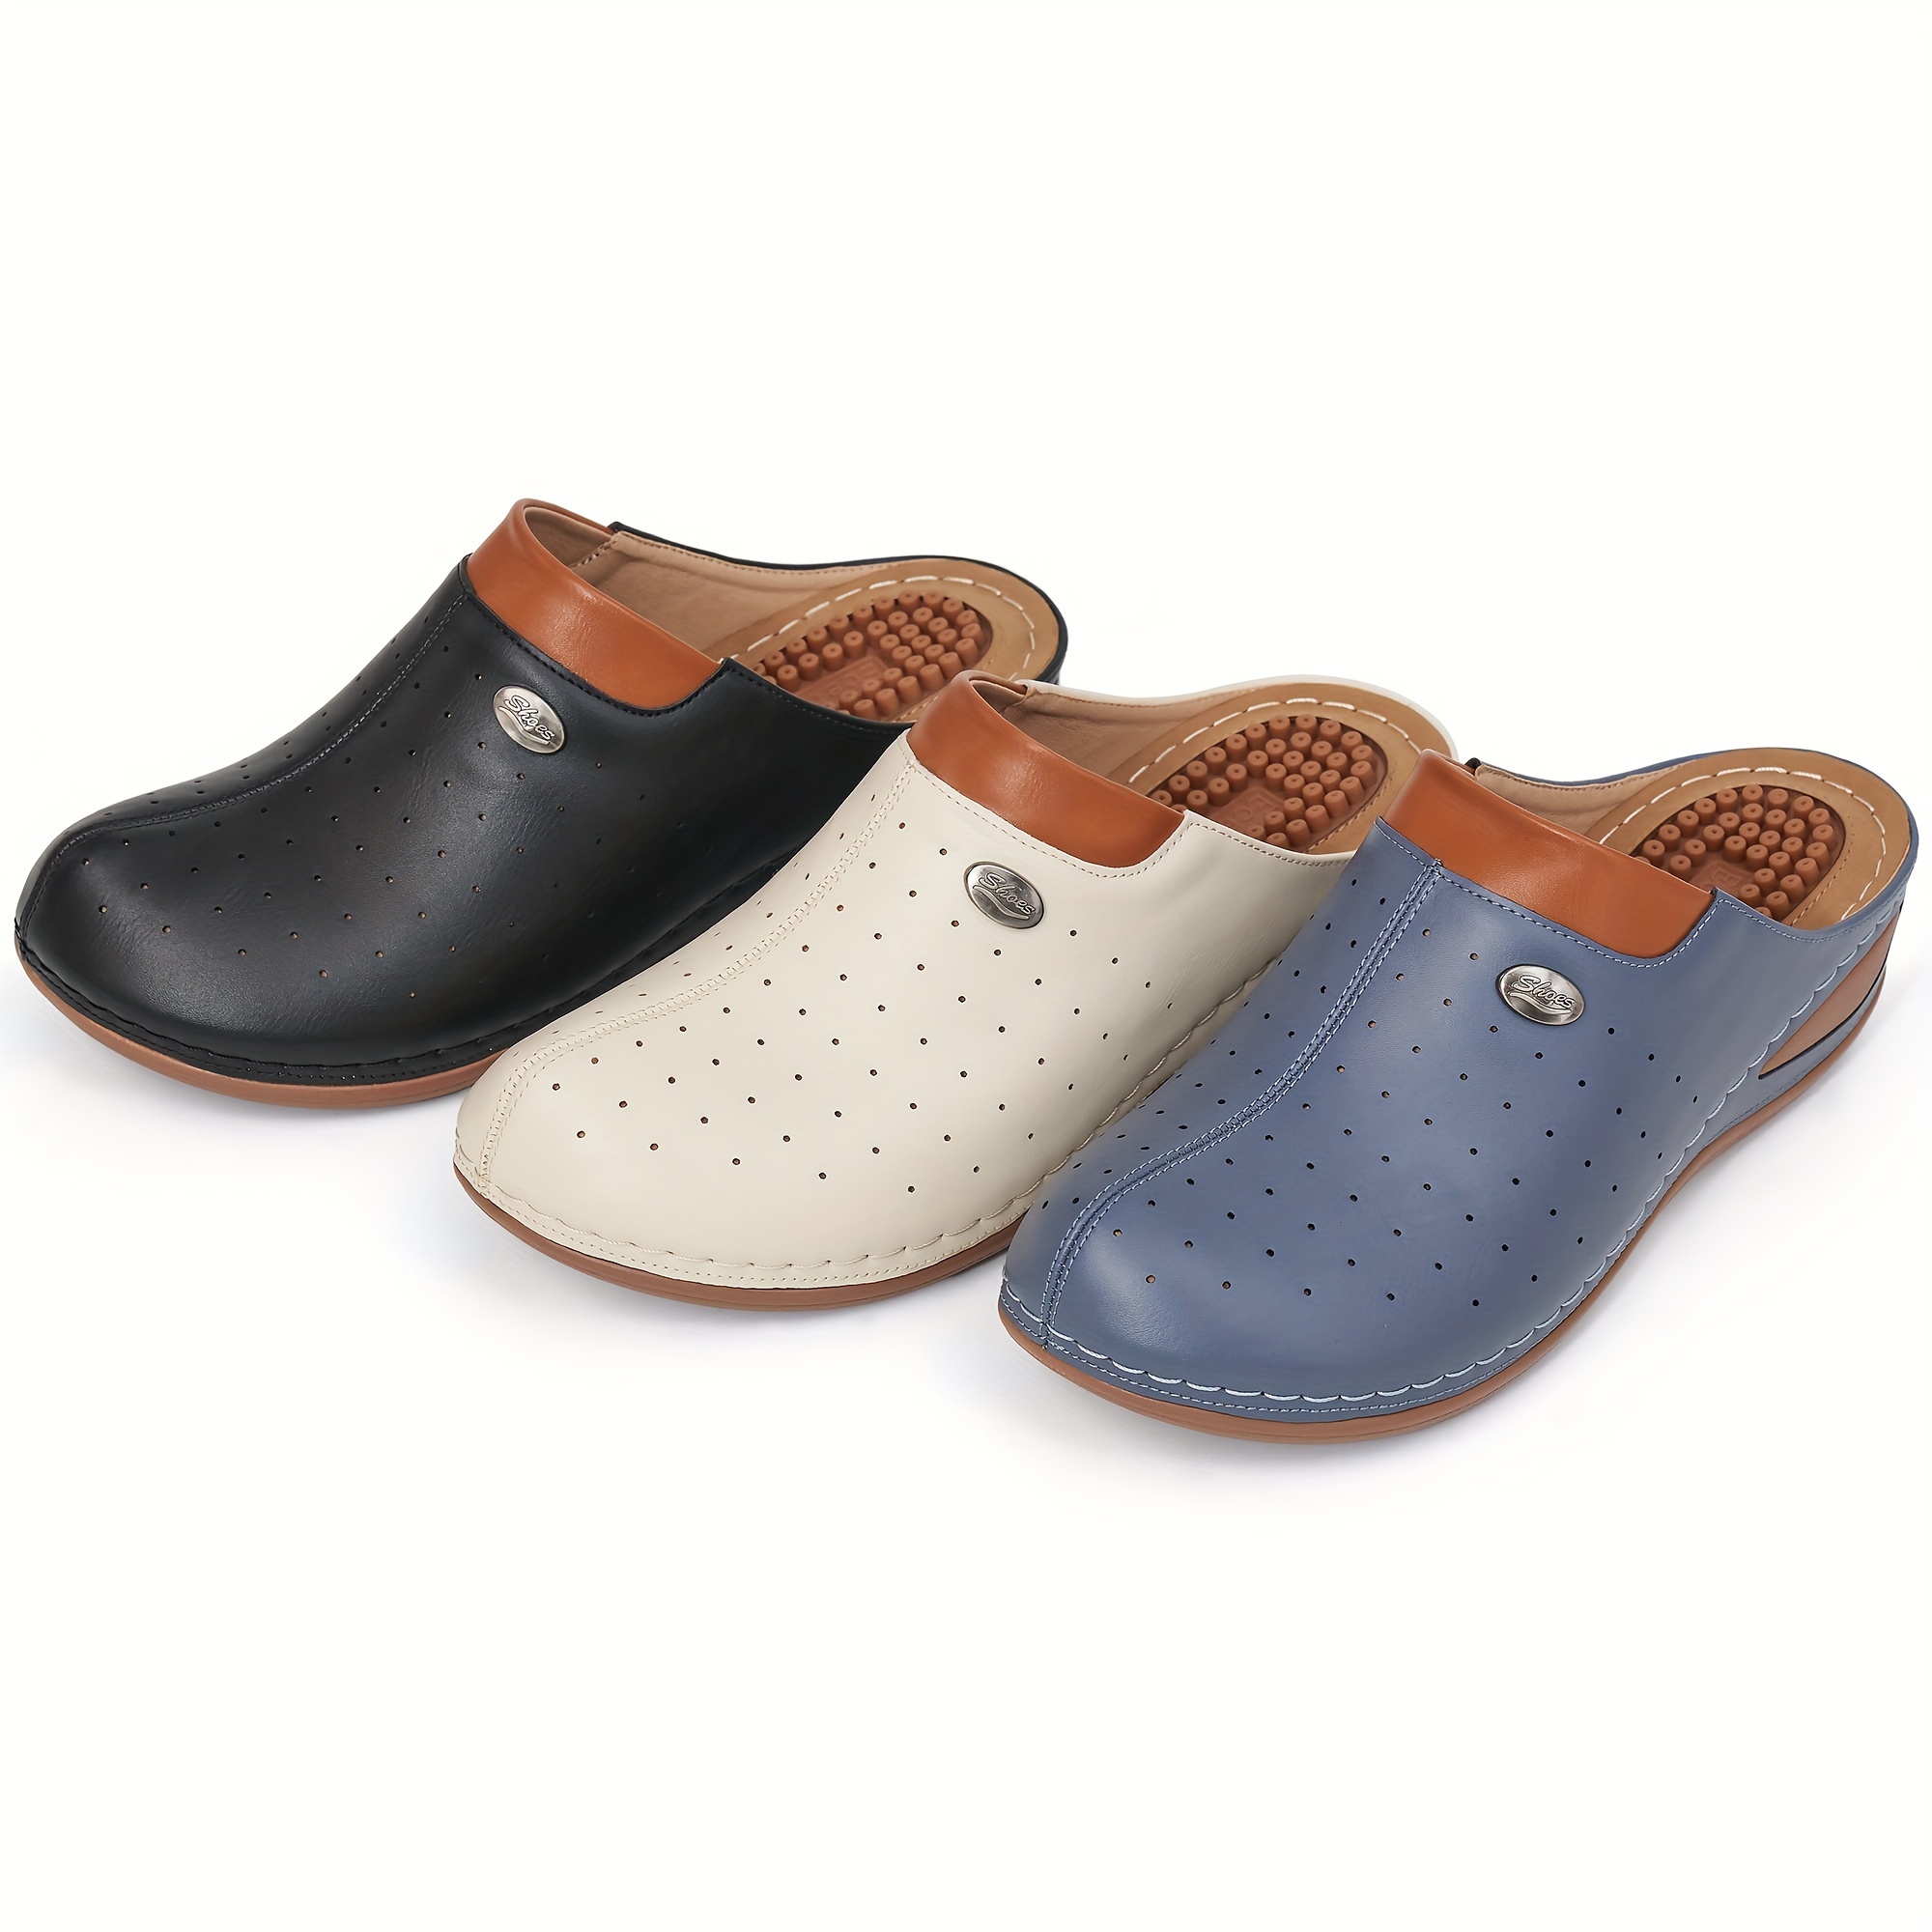 platform footbed mules women s perforated breathable closed